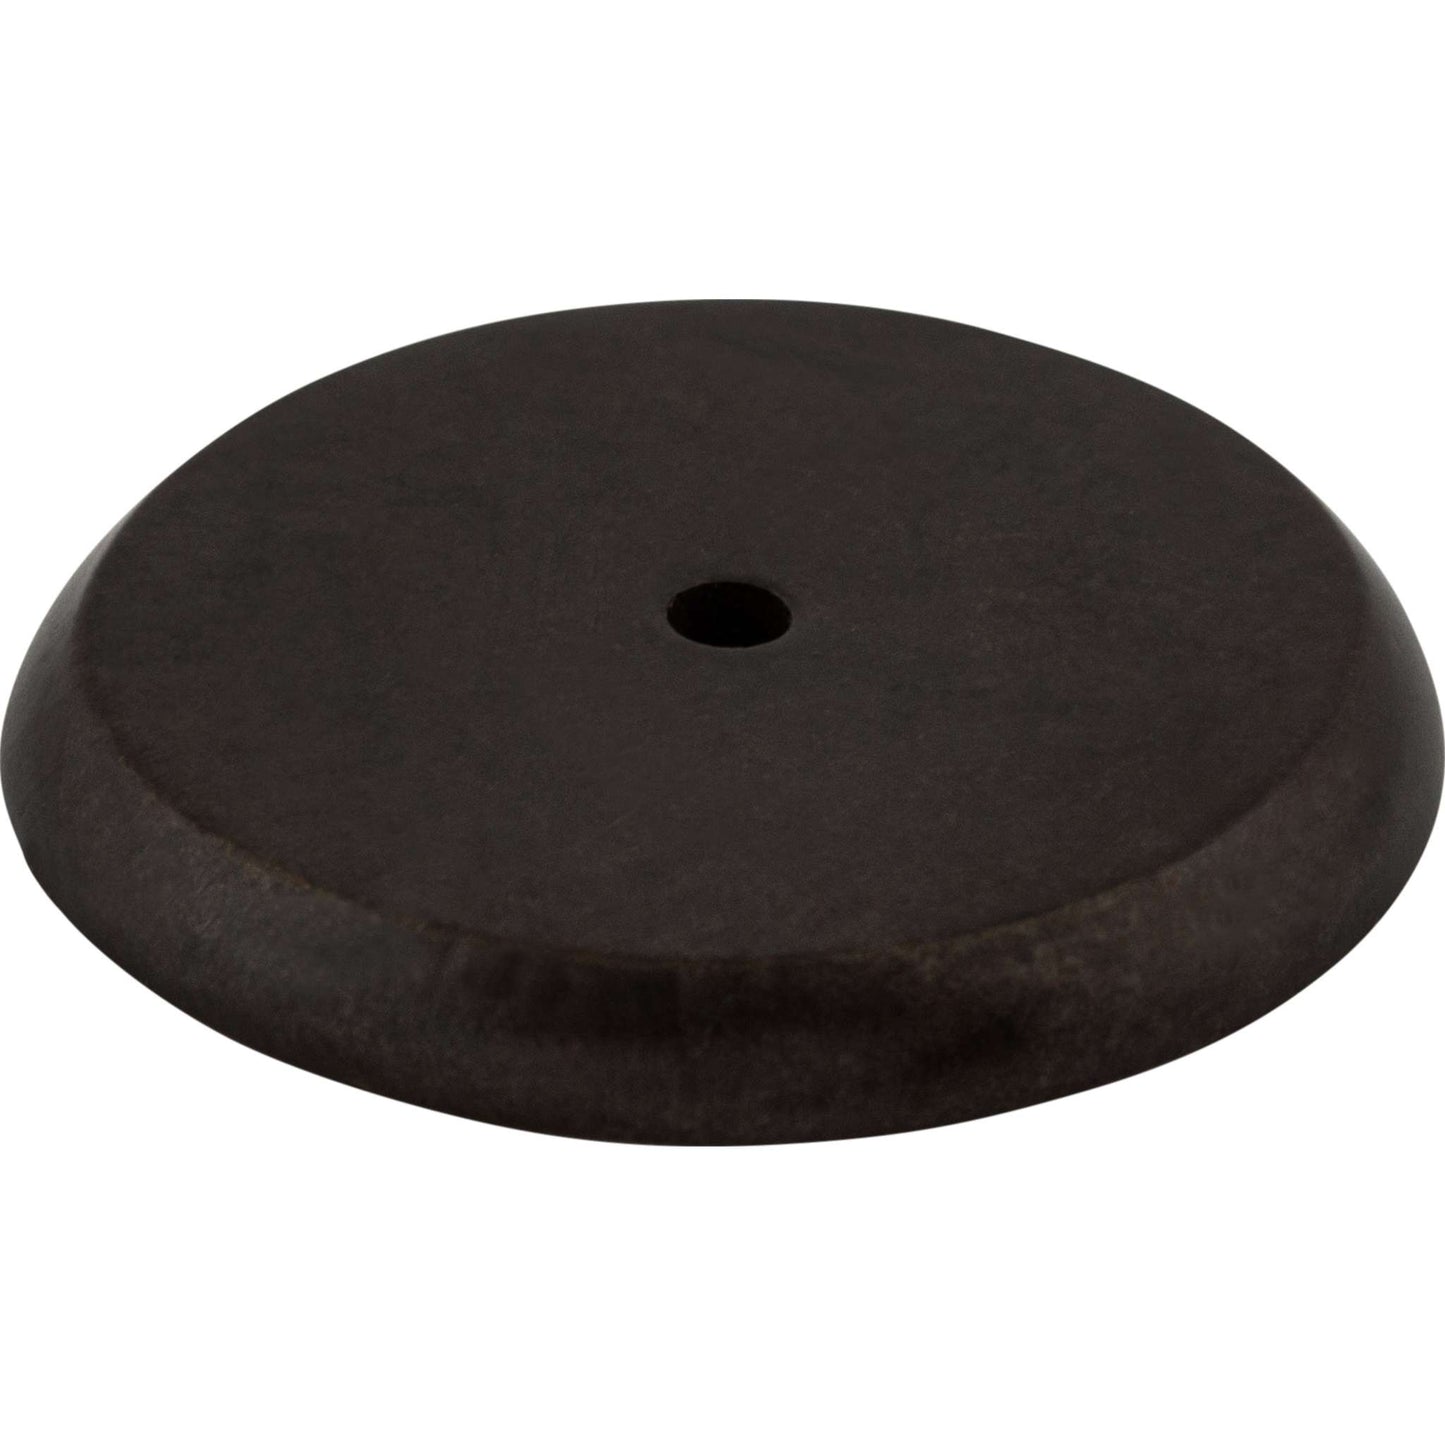 Top Knobs - Aspen Round Backplate